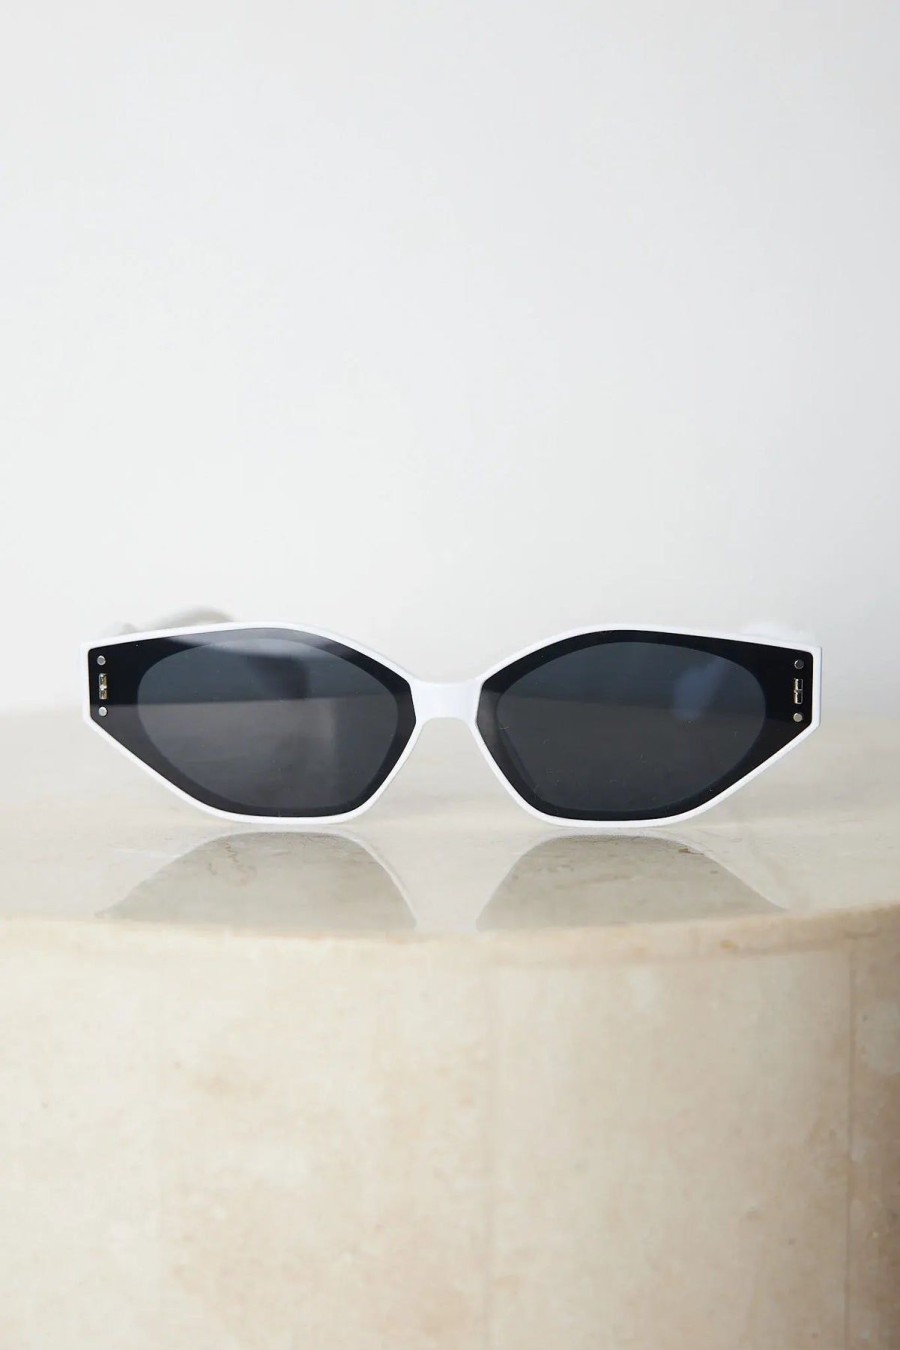 Luxury Mens Designer Spitfire Sunglasses With Arrow Totem Square Frame And  Case White Lunettes Style From Fashionsdesigner, $4.87 | DHgate.Com